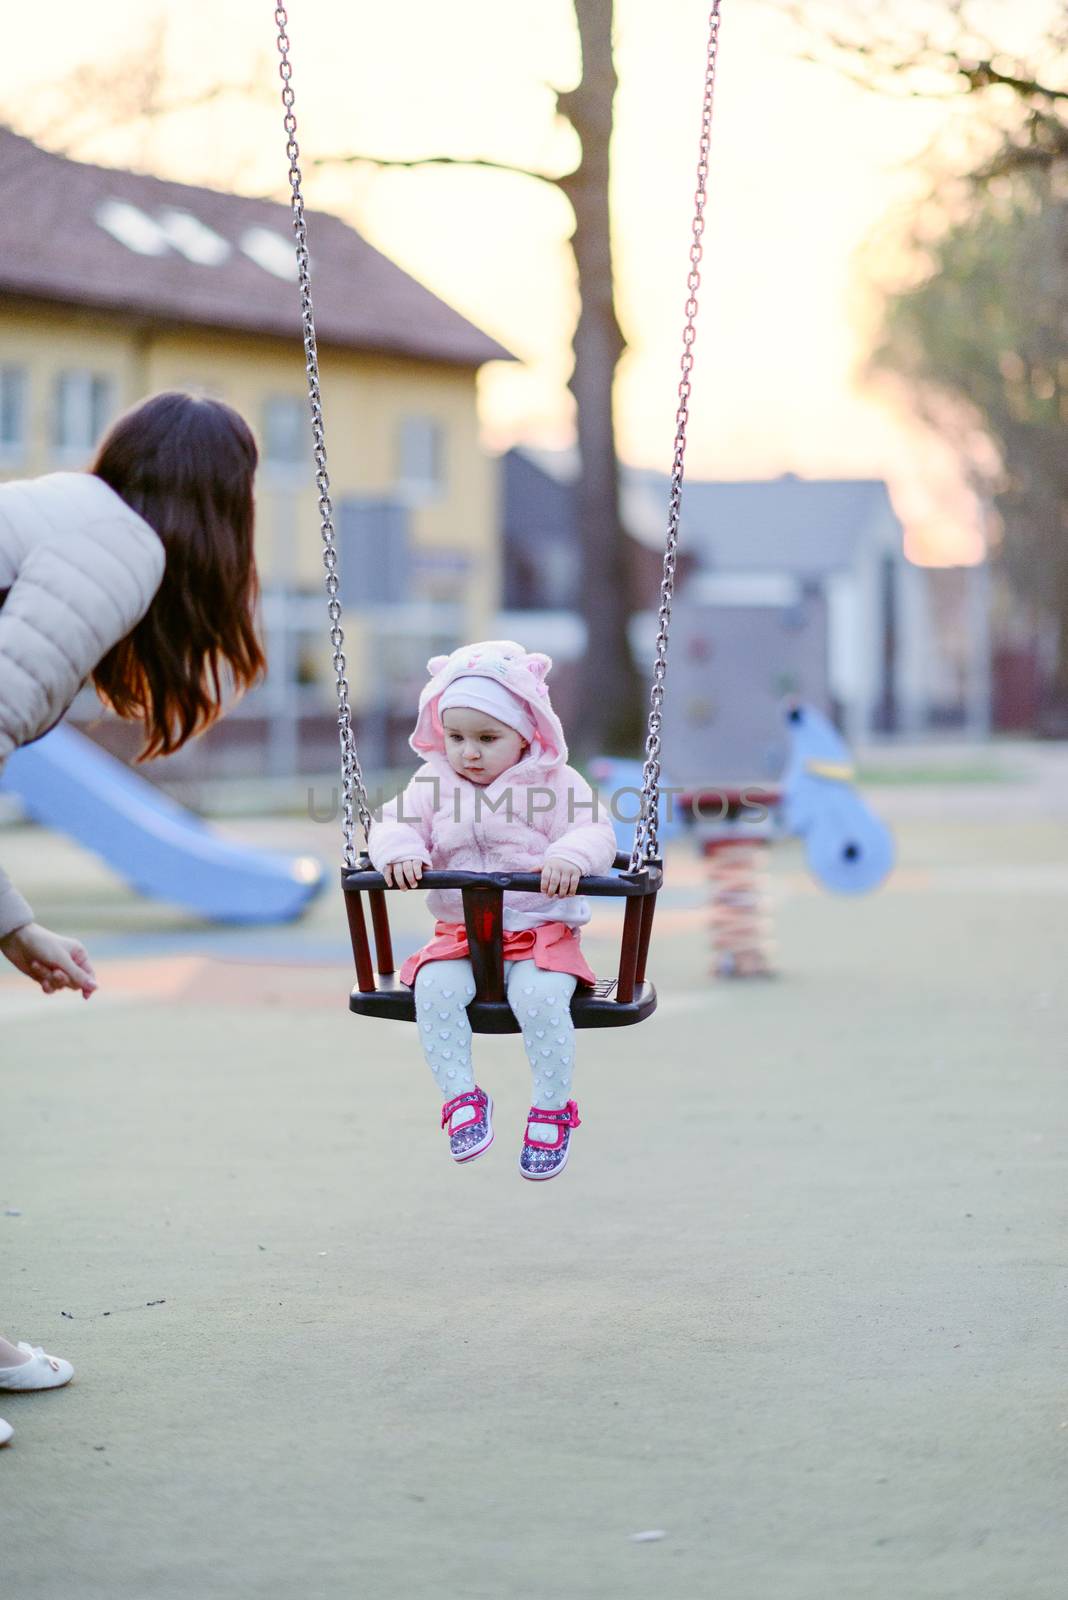 Little girl spending fantastic time on playground. Happy childhood.